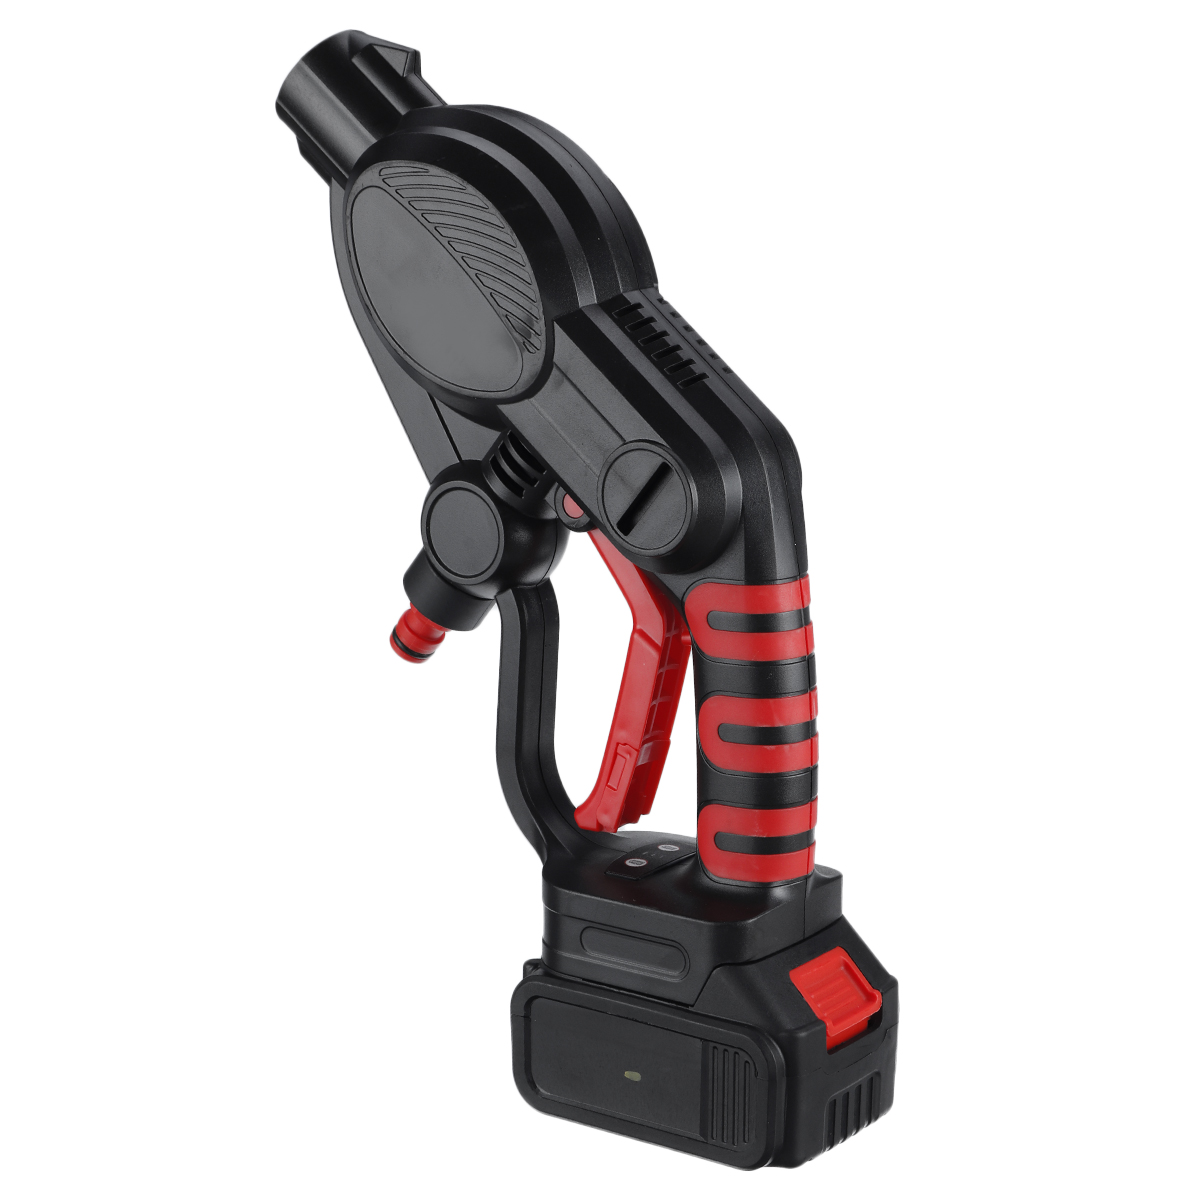 21V-Multifunctional-Cordless-Pressure-Cleaner-Washer-Sprayer-Water-Hose-Nozzle-Pump-with-Battery-1292573-11